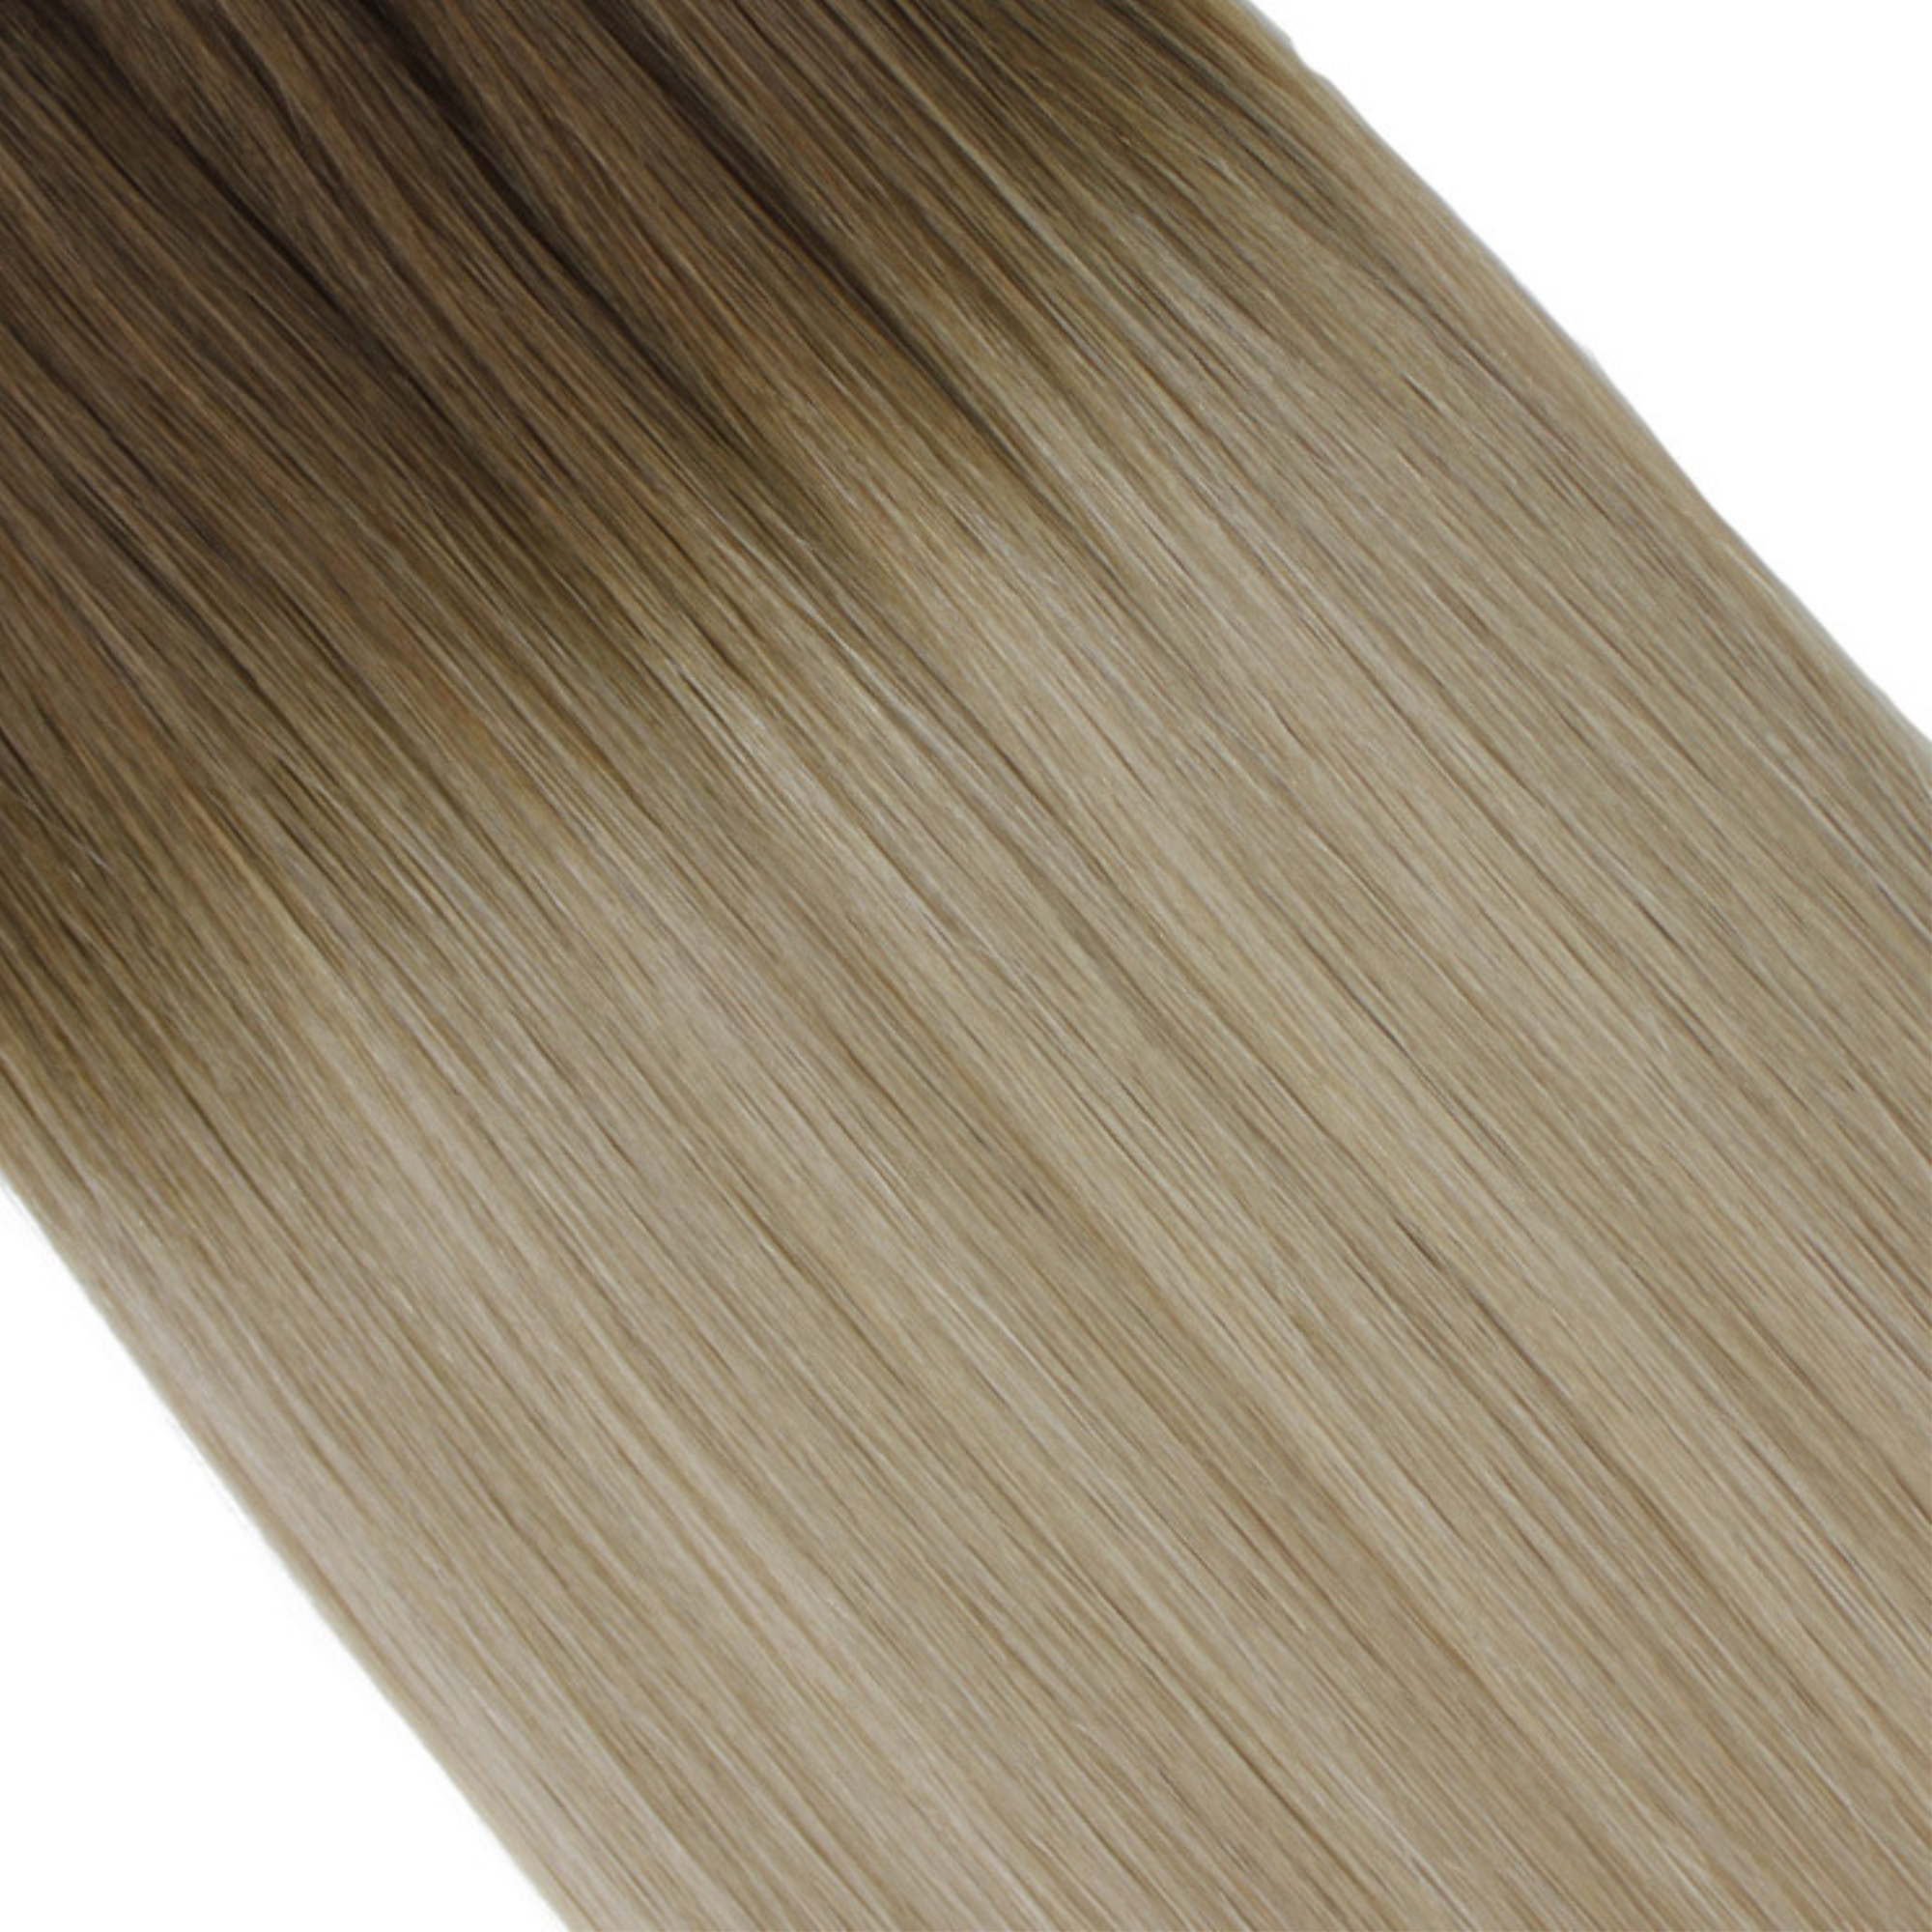 "hair rehab london 18" tape hair extensions shade swatch titled rooted baby blonde"